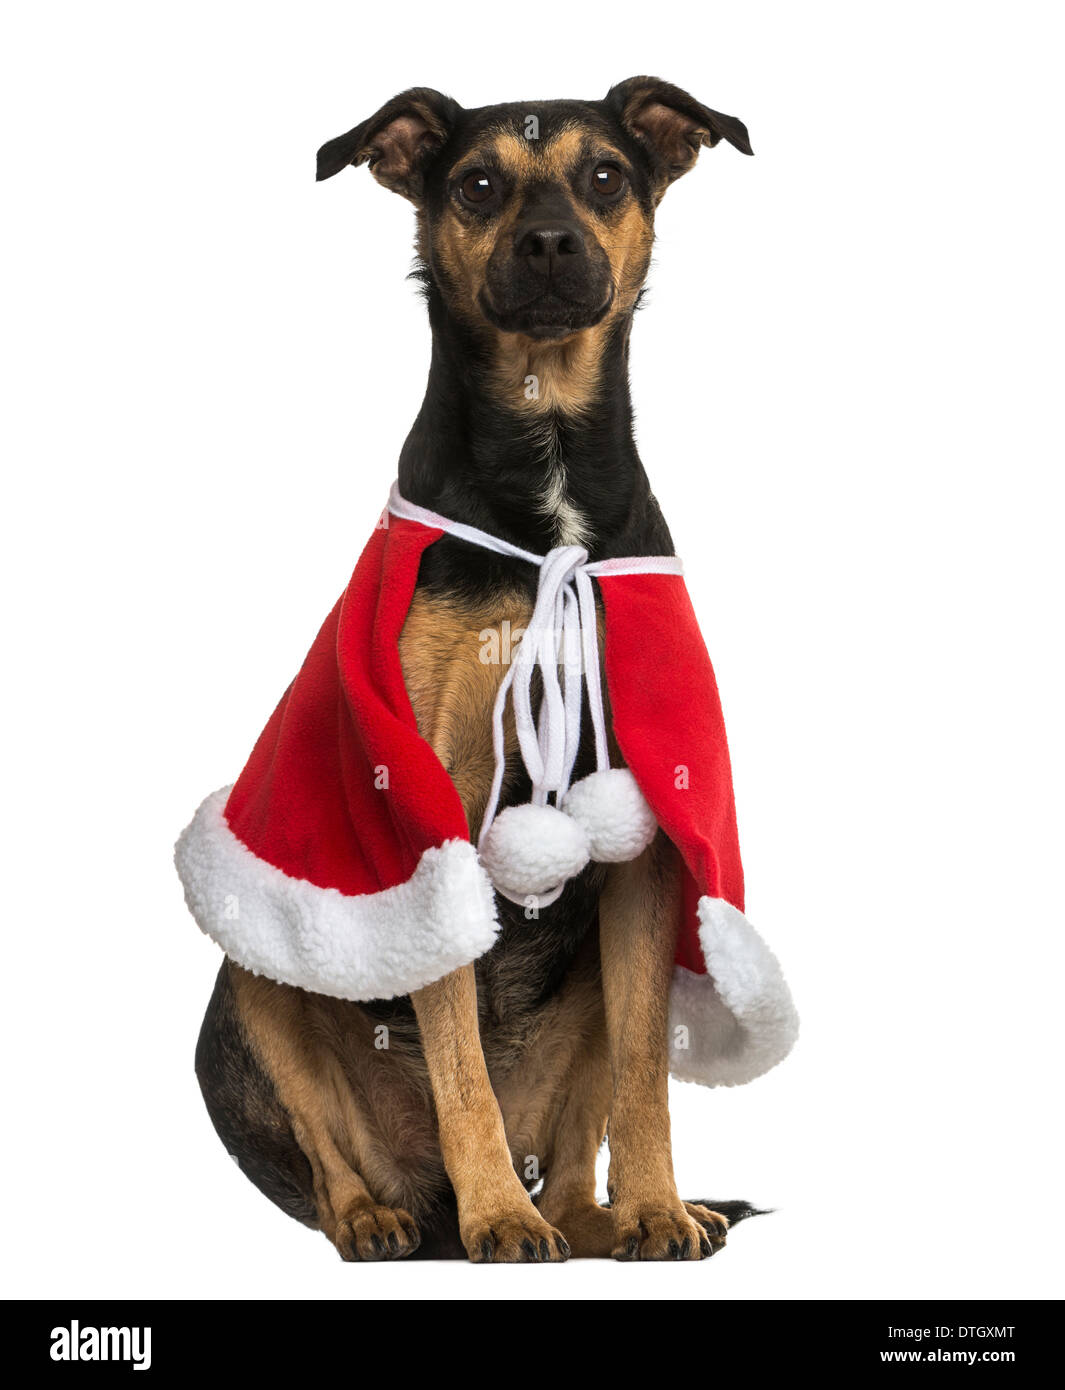 Crossbreed dog wearing a Christmas cape, sitting against white background Stock Photo